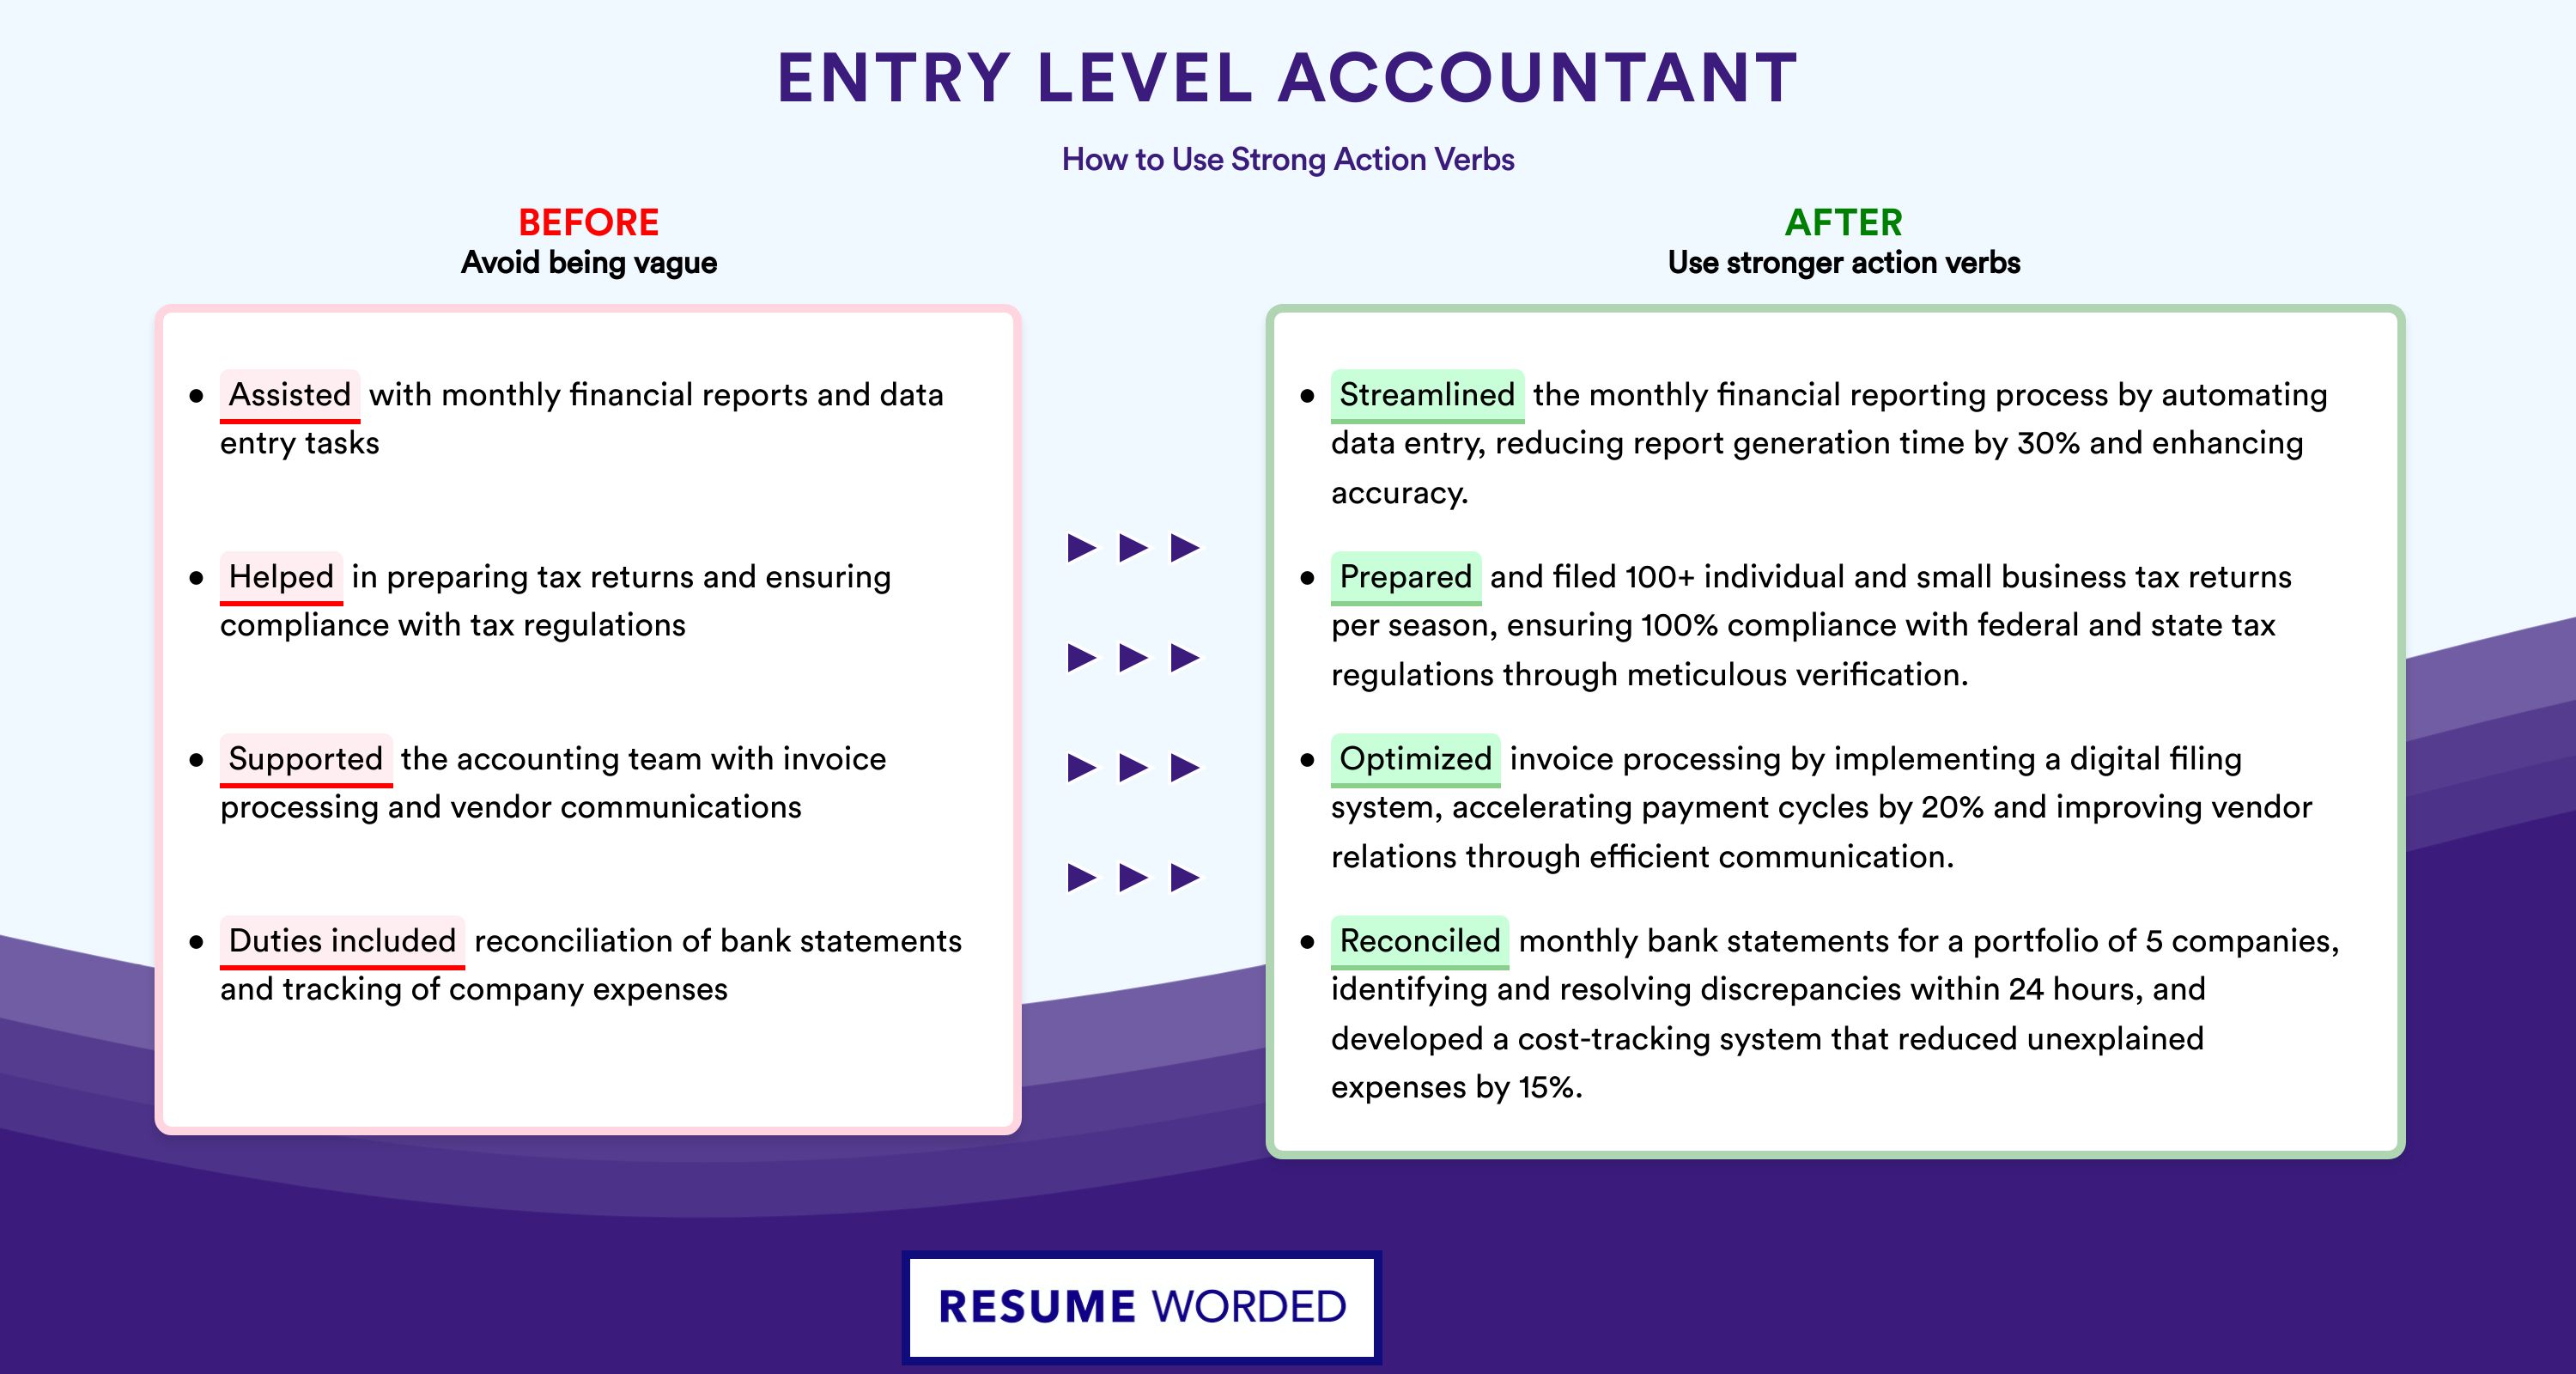 Action Verbs for Entry Level Accountant